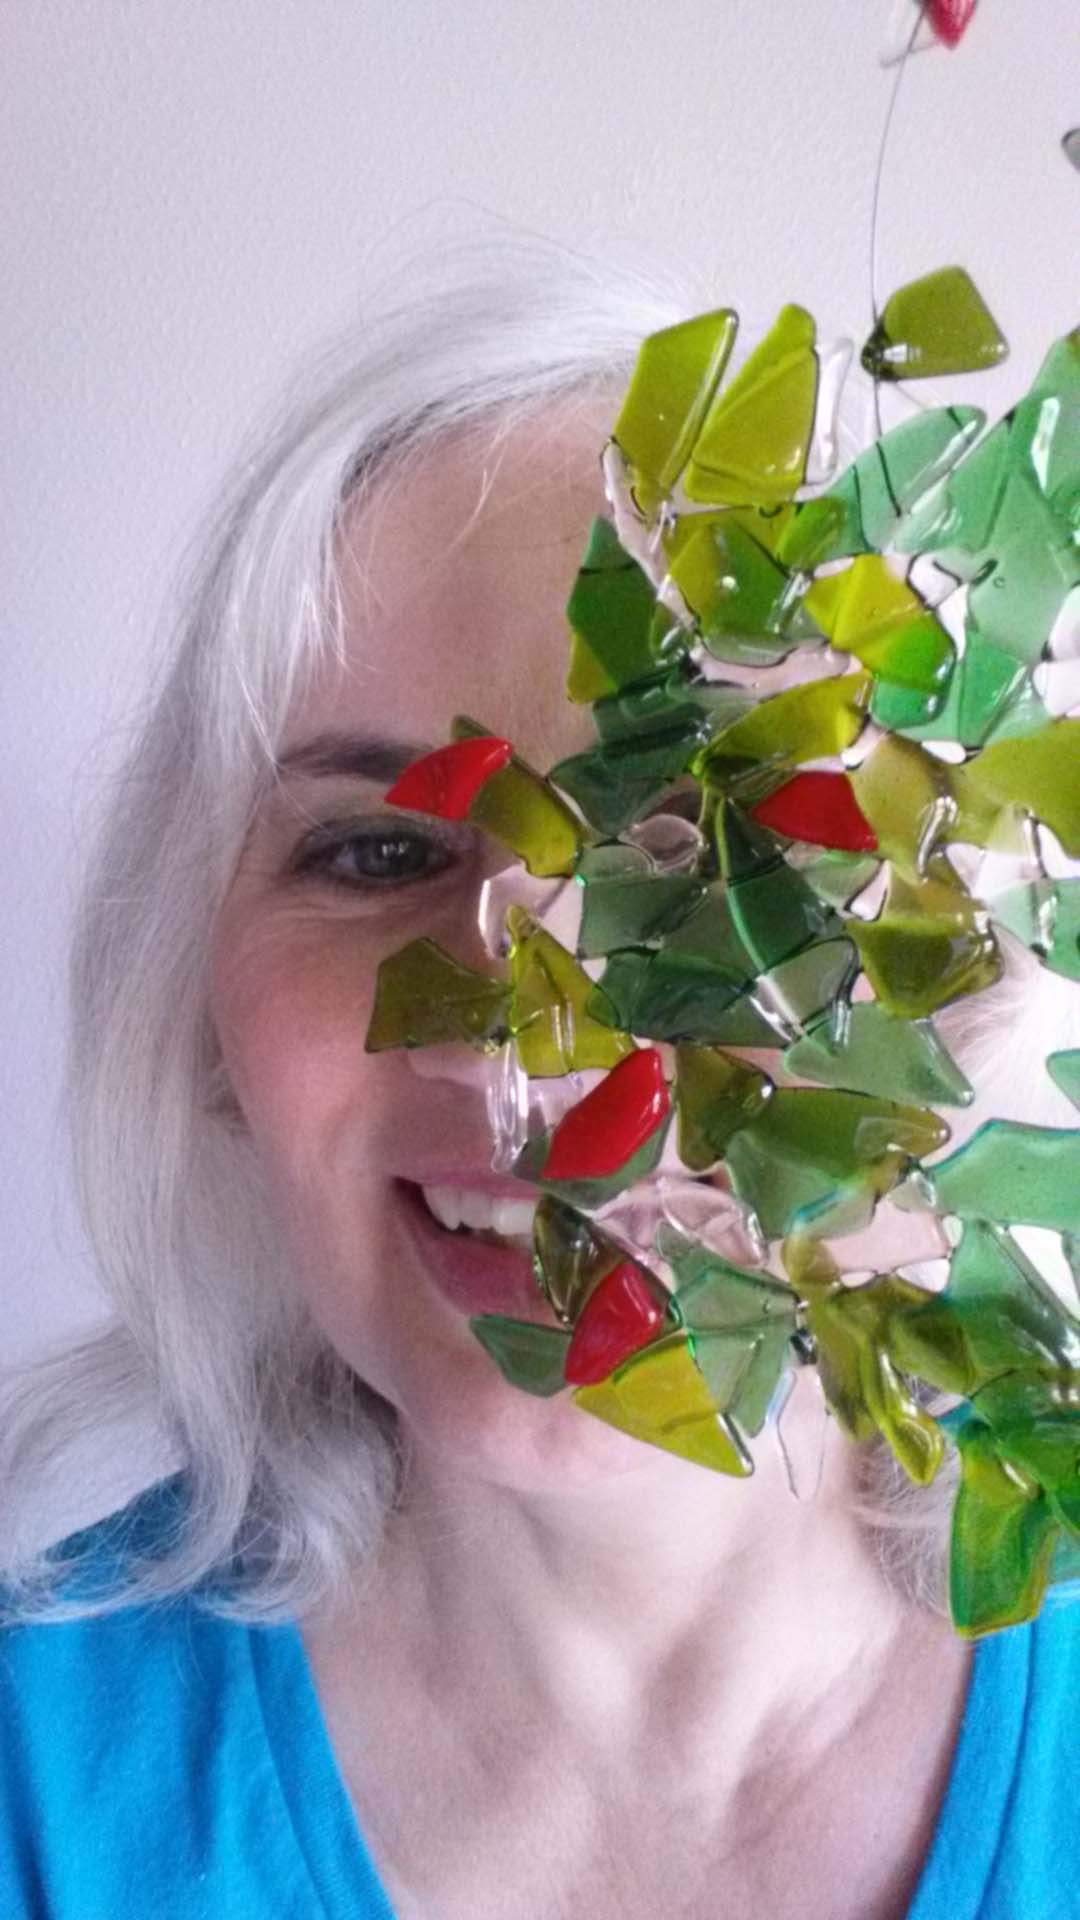 Selfie with a glass tree